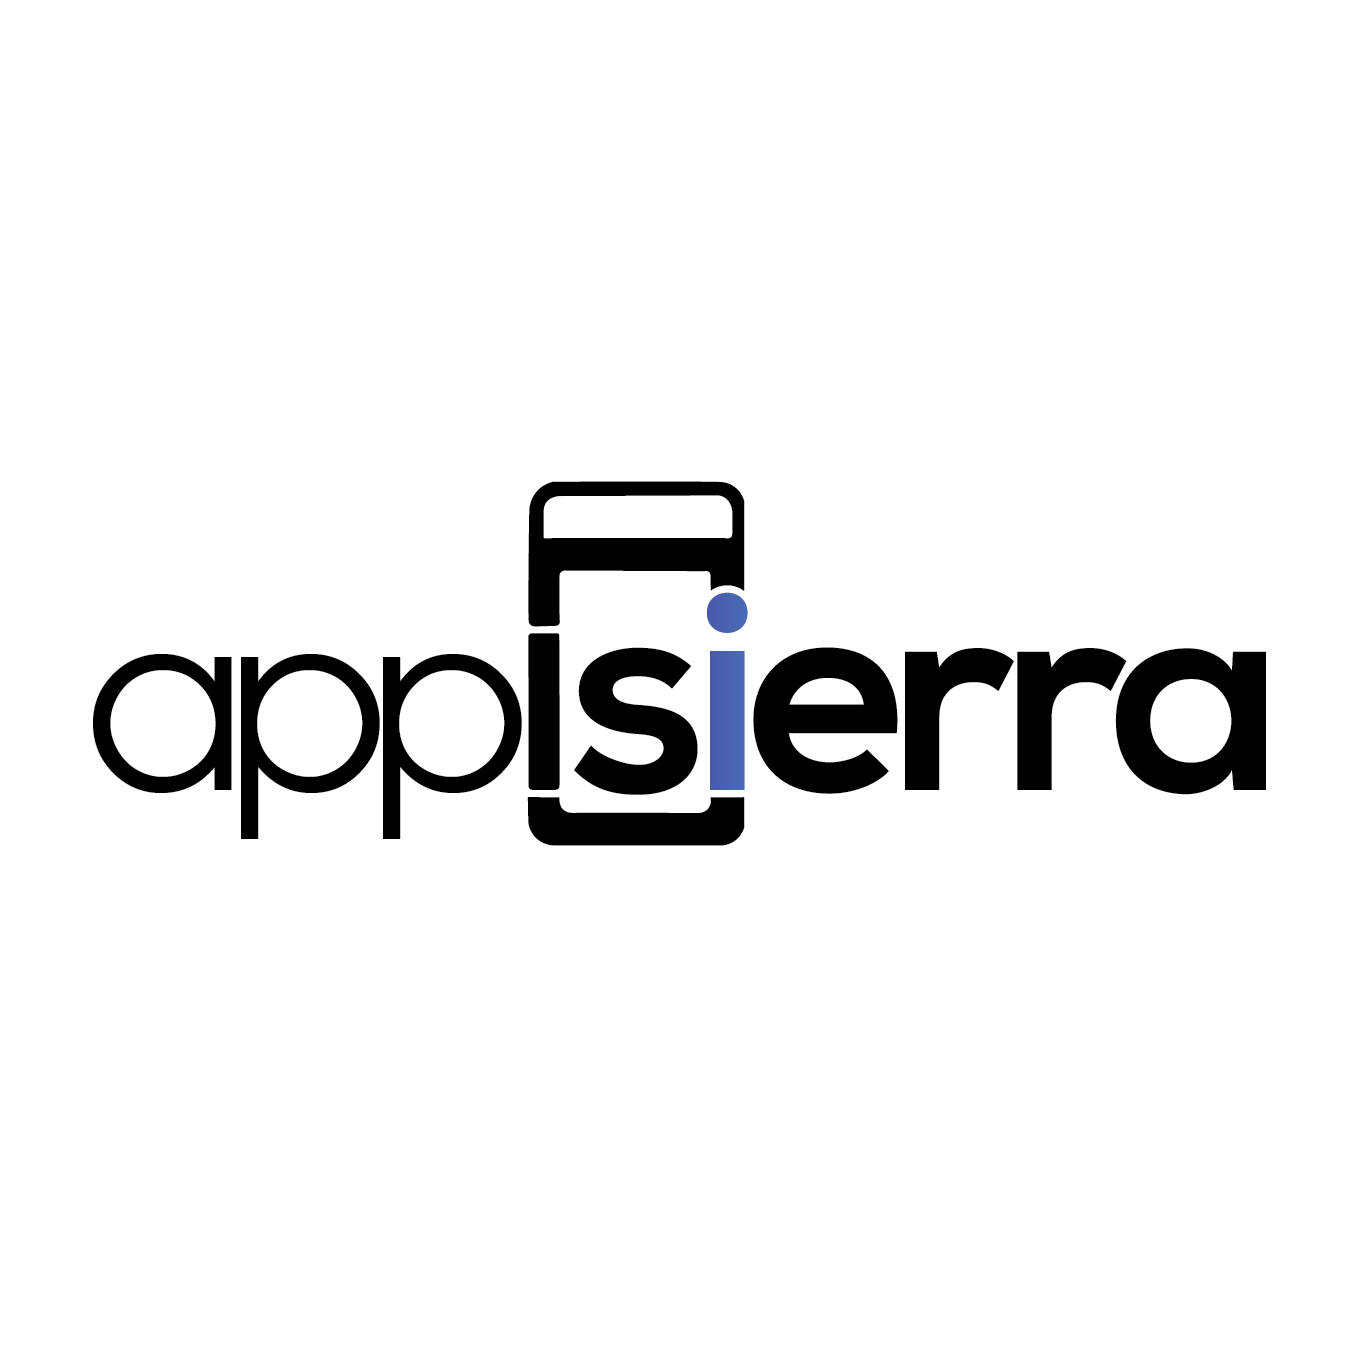 AppSierra profile on Qualified.One